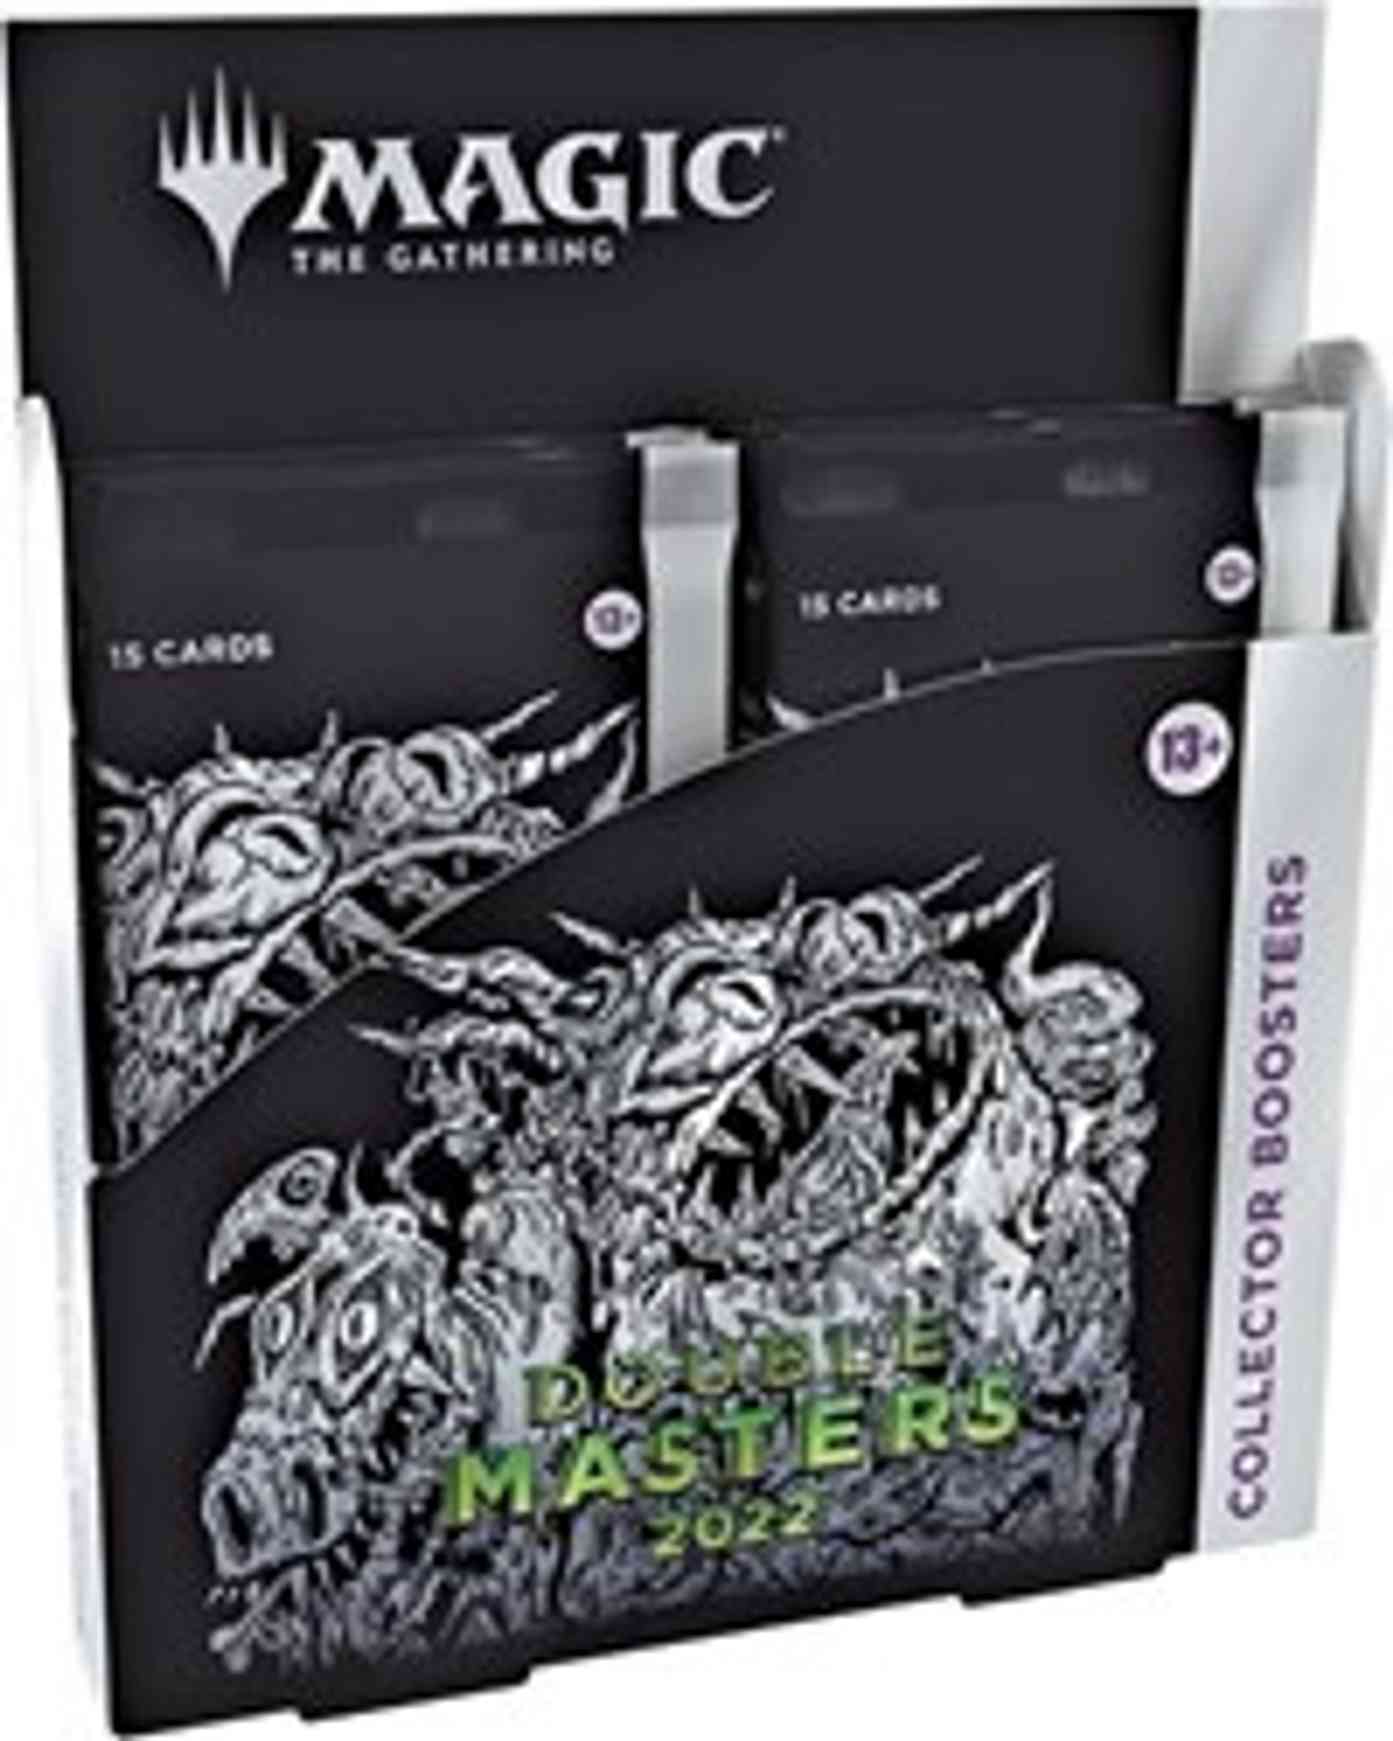 Double Masters 2022 - Collector Booster Display magic card front